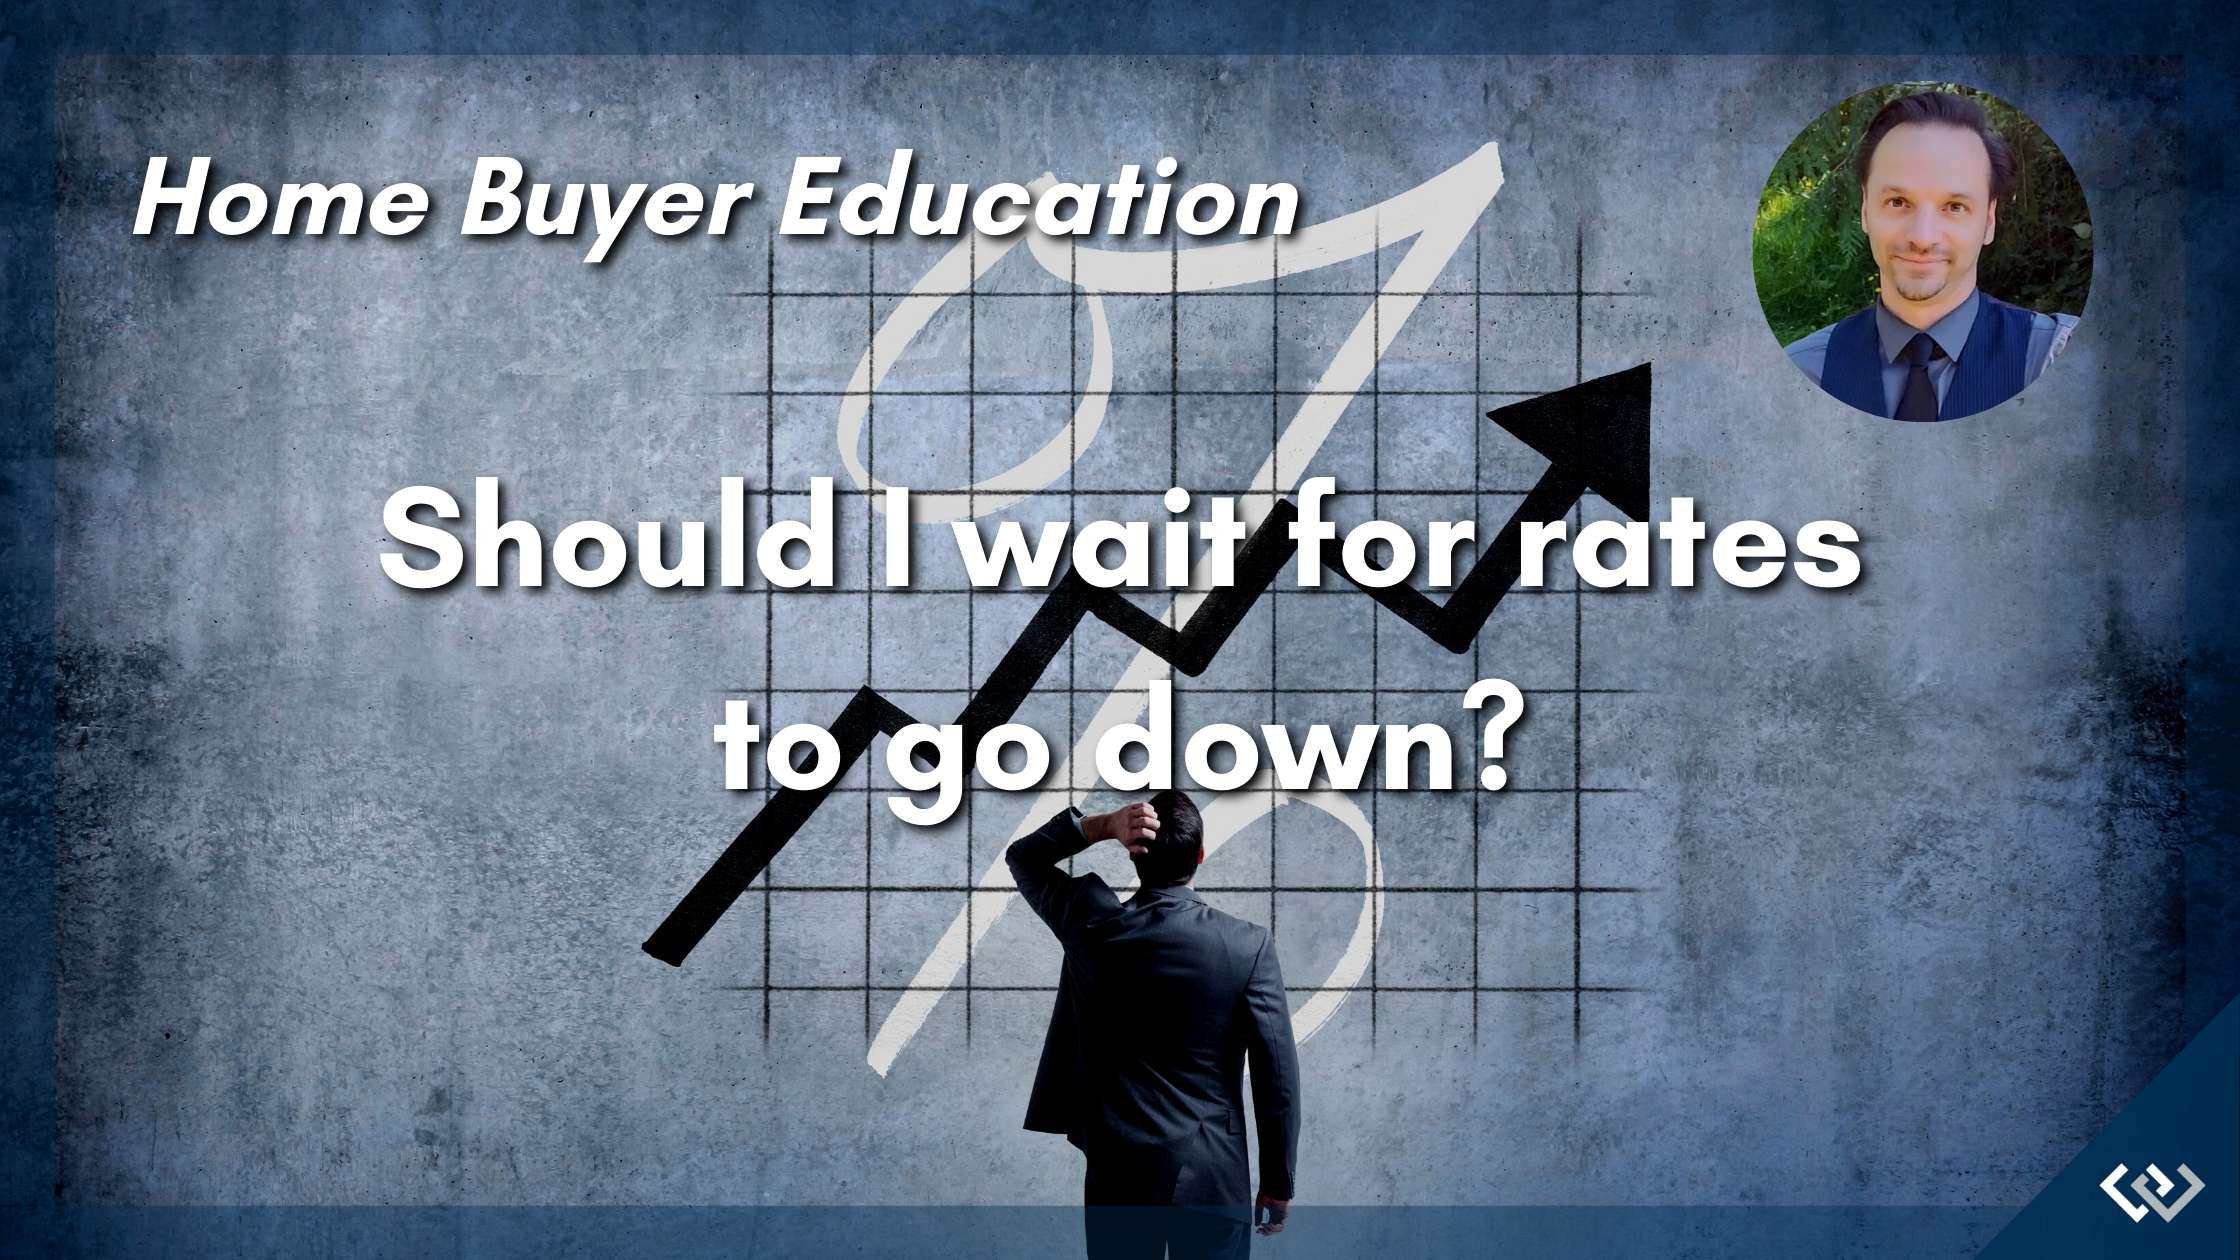 Home Buyer Education - Should I wait for mortgage rates to go down